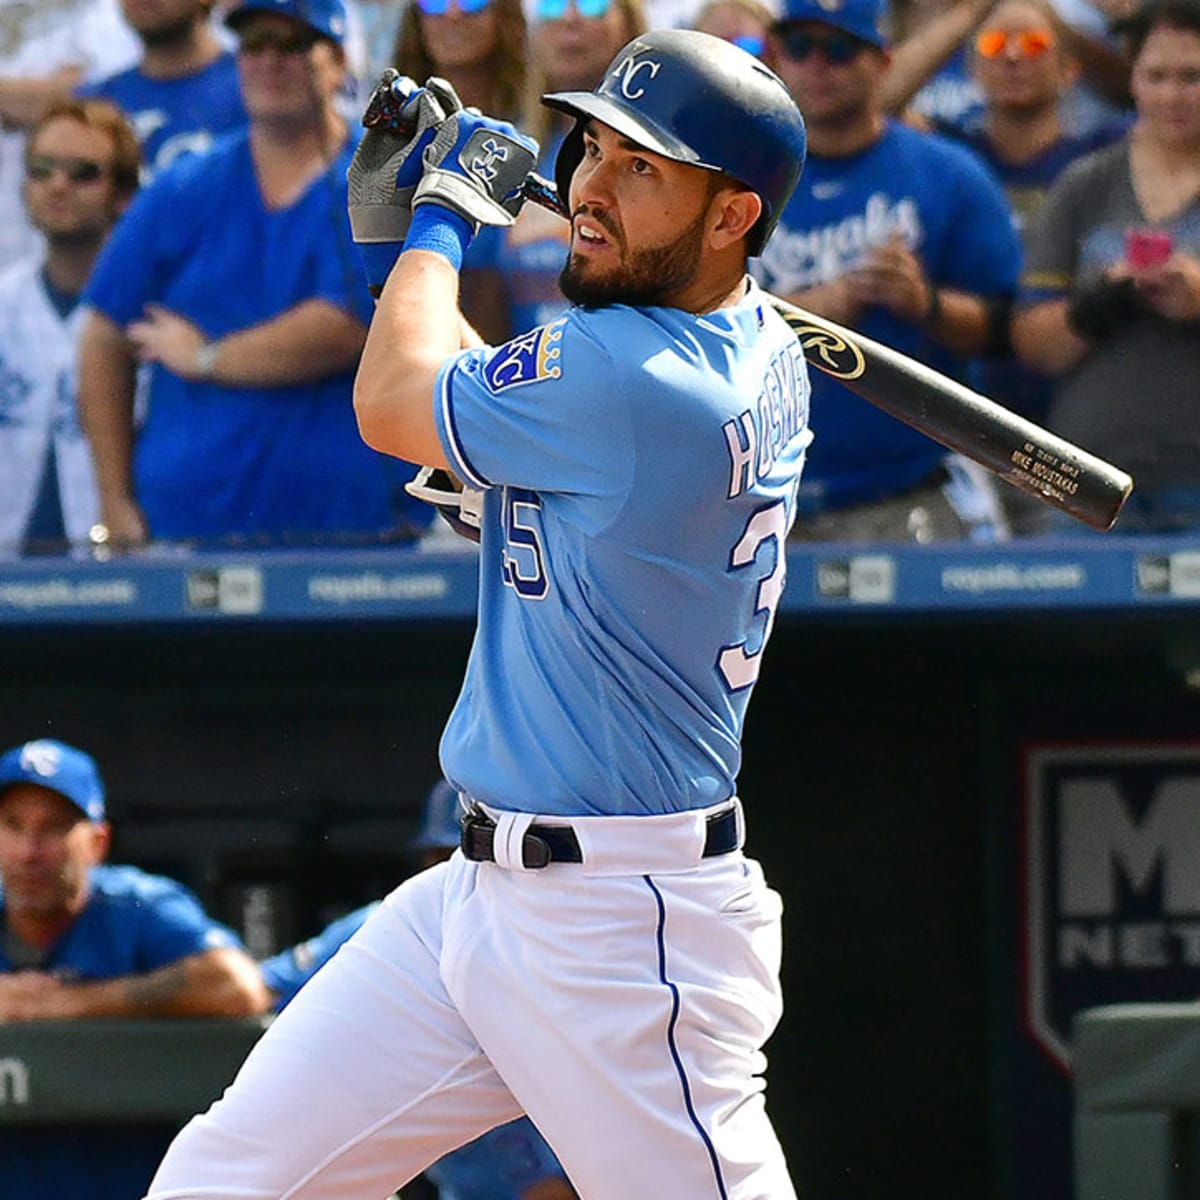 Eric Hosmer, No Longer Needed in San Diego, Will Fill a Hole in Boston